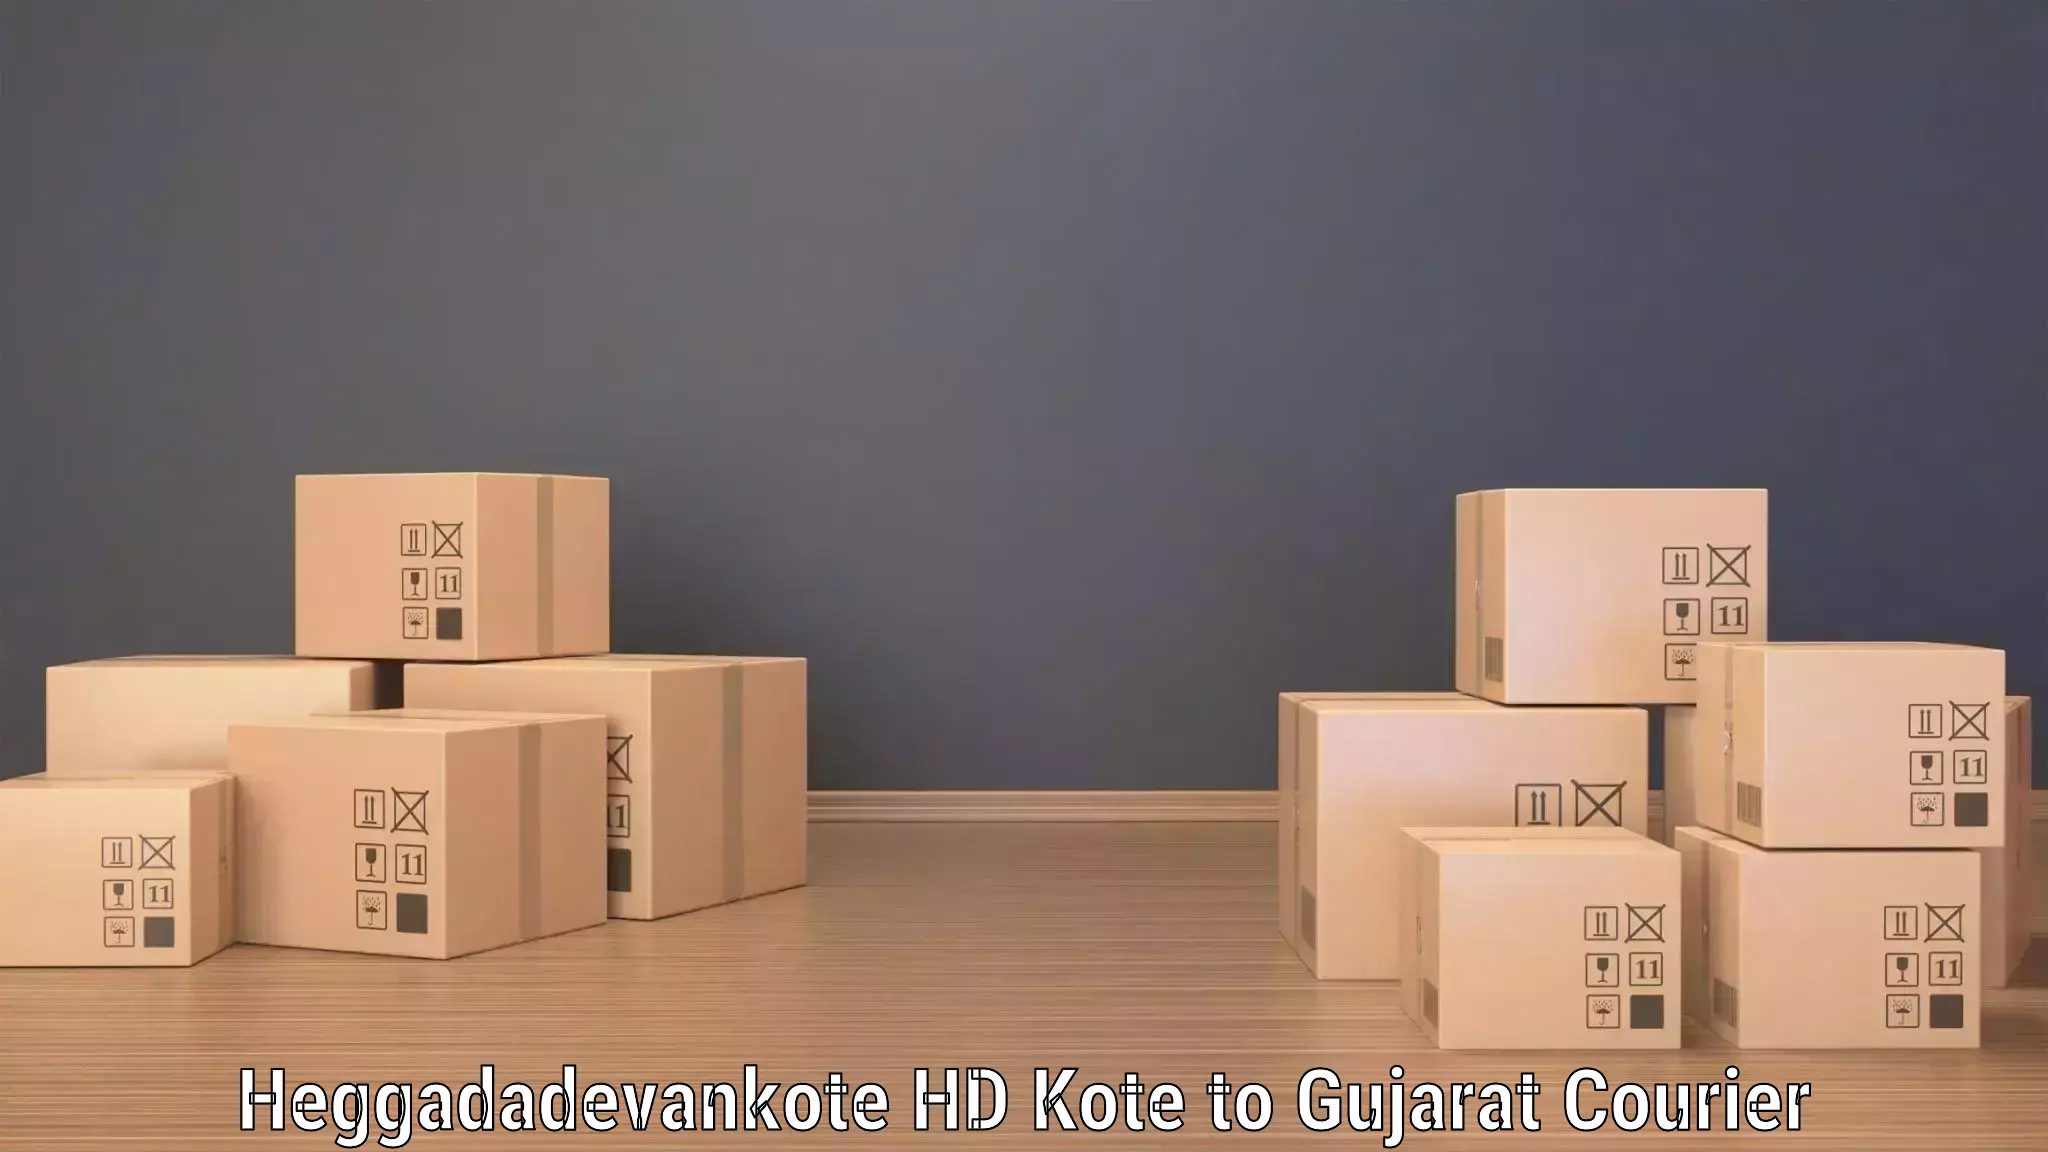 End-to-end delivery Heggadadevankote HD Kote to Ankleshwar